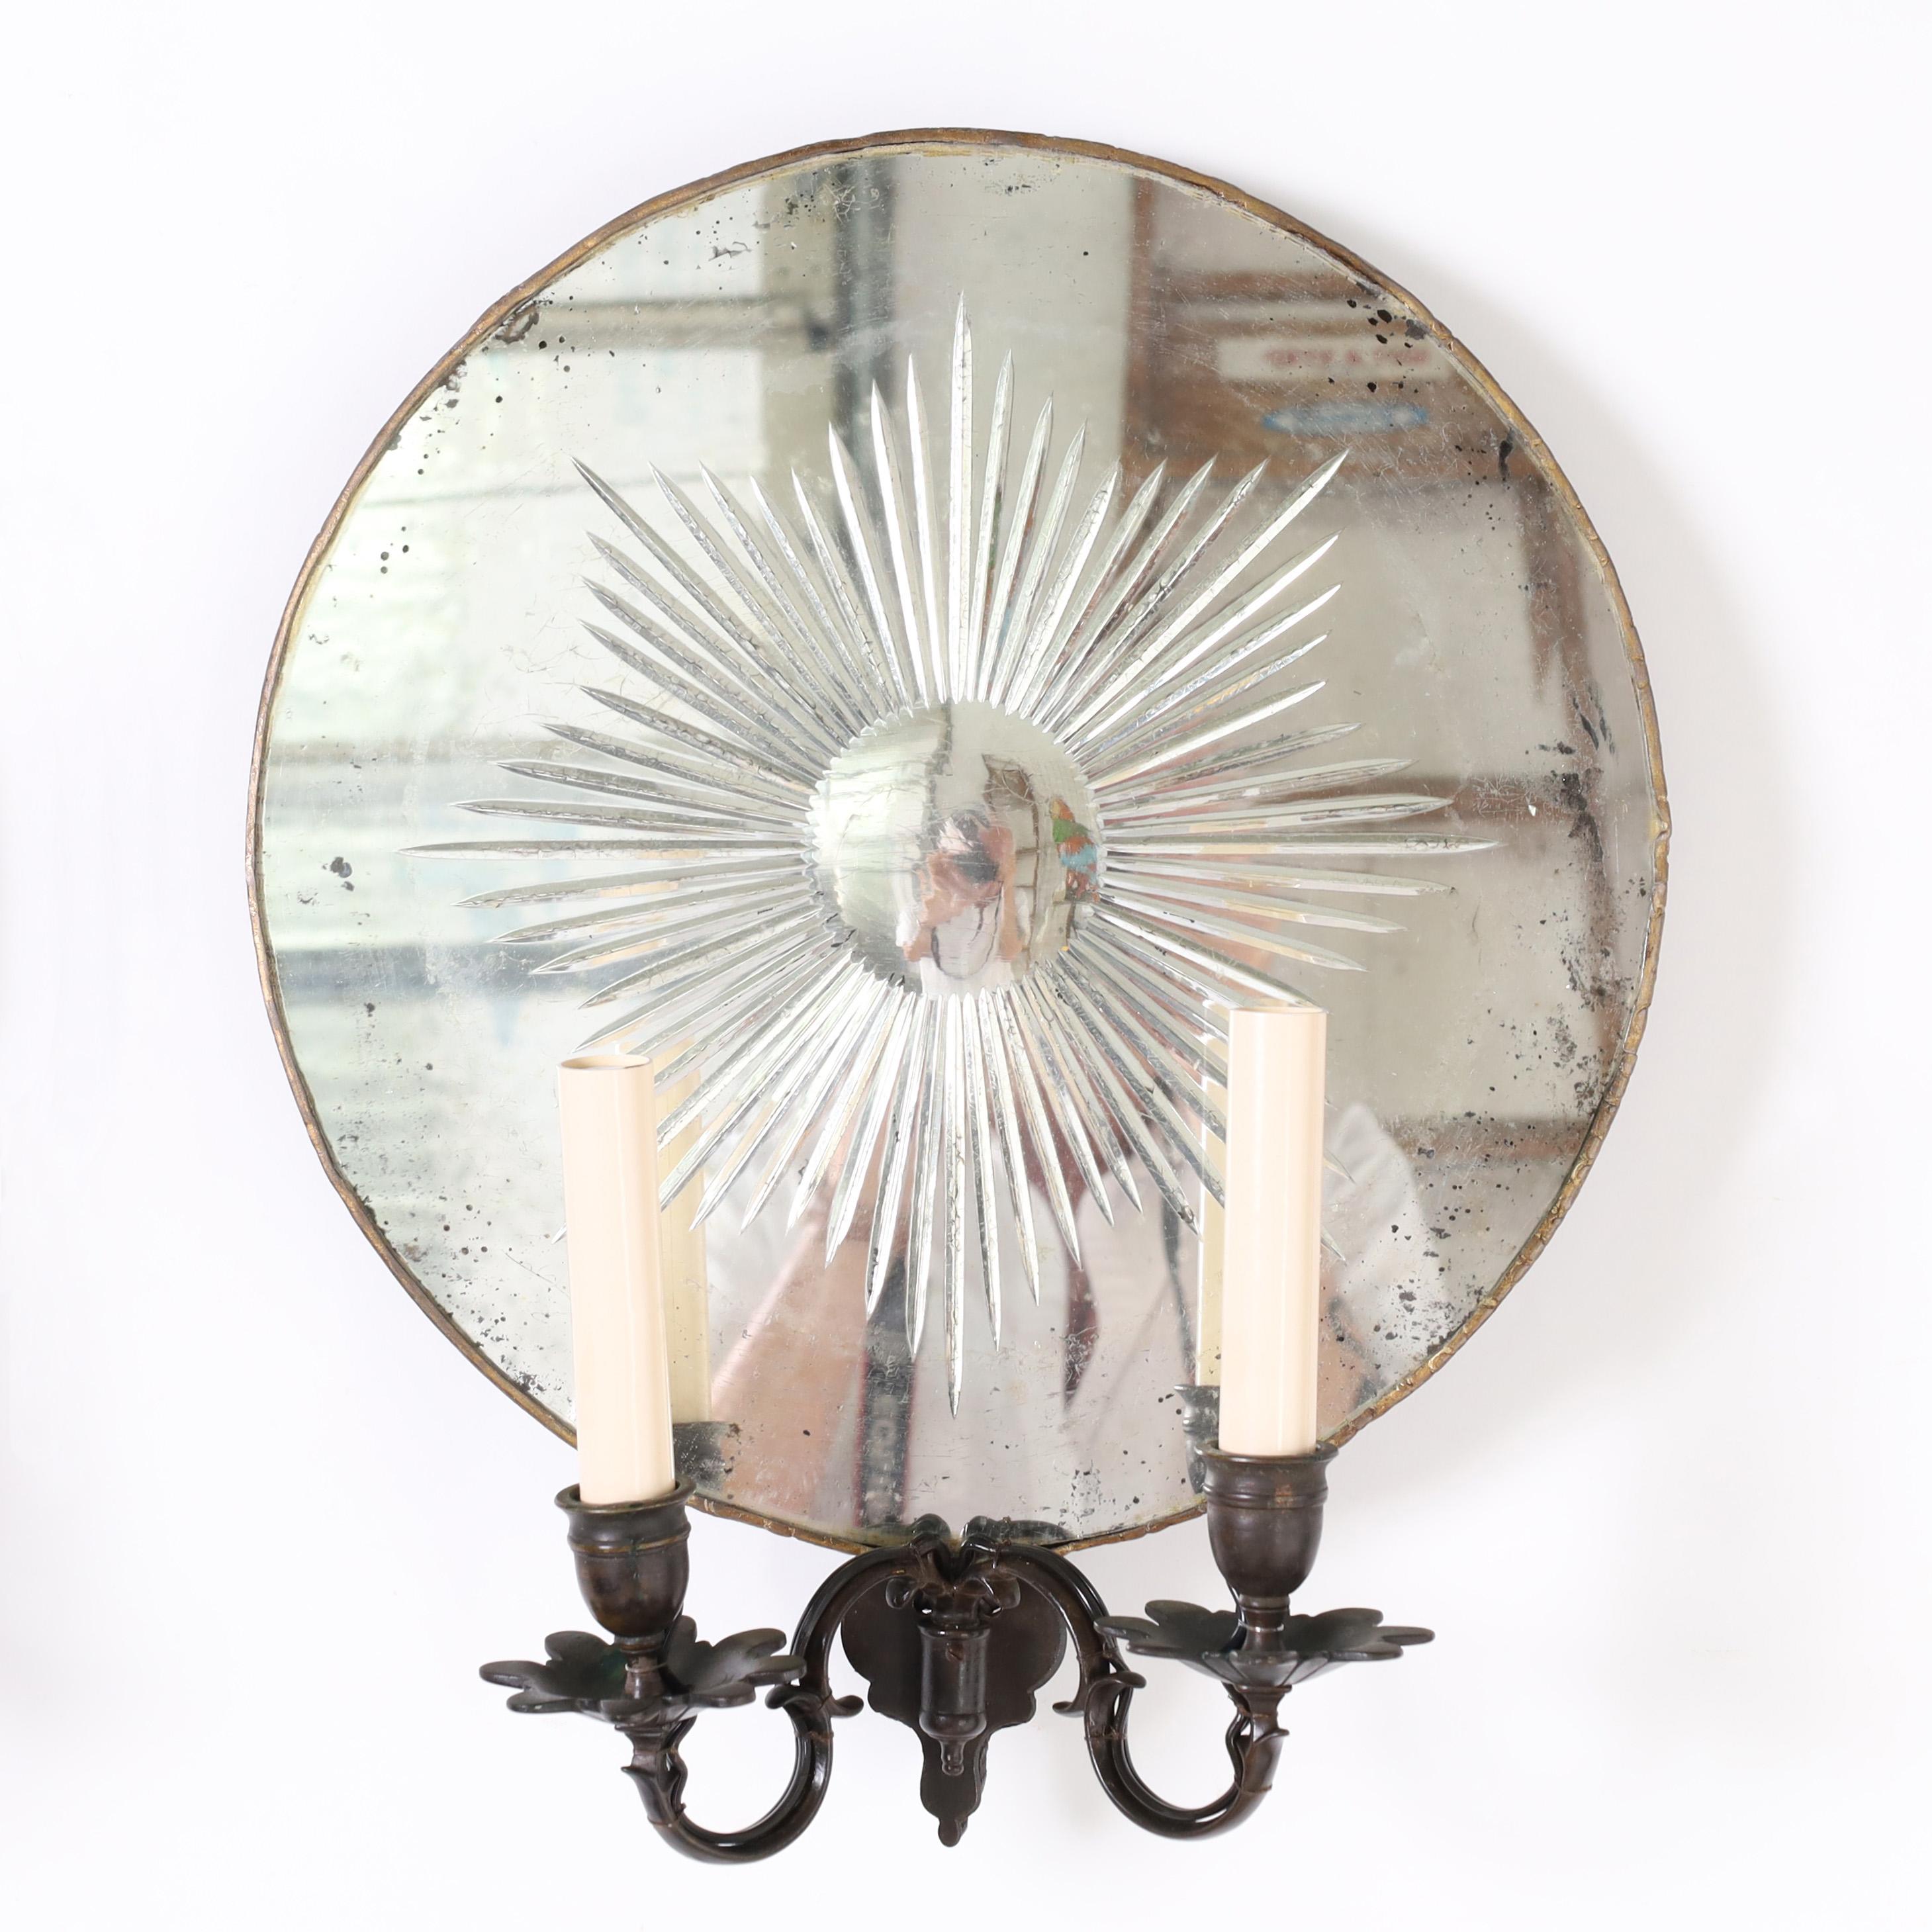 19th Century Pair of Antique English Mirrored Wall Sconces